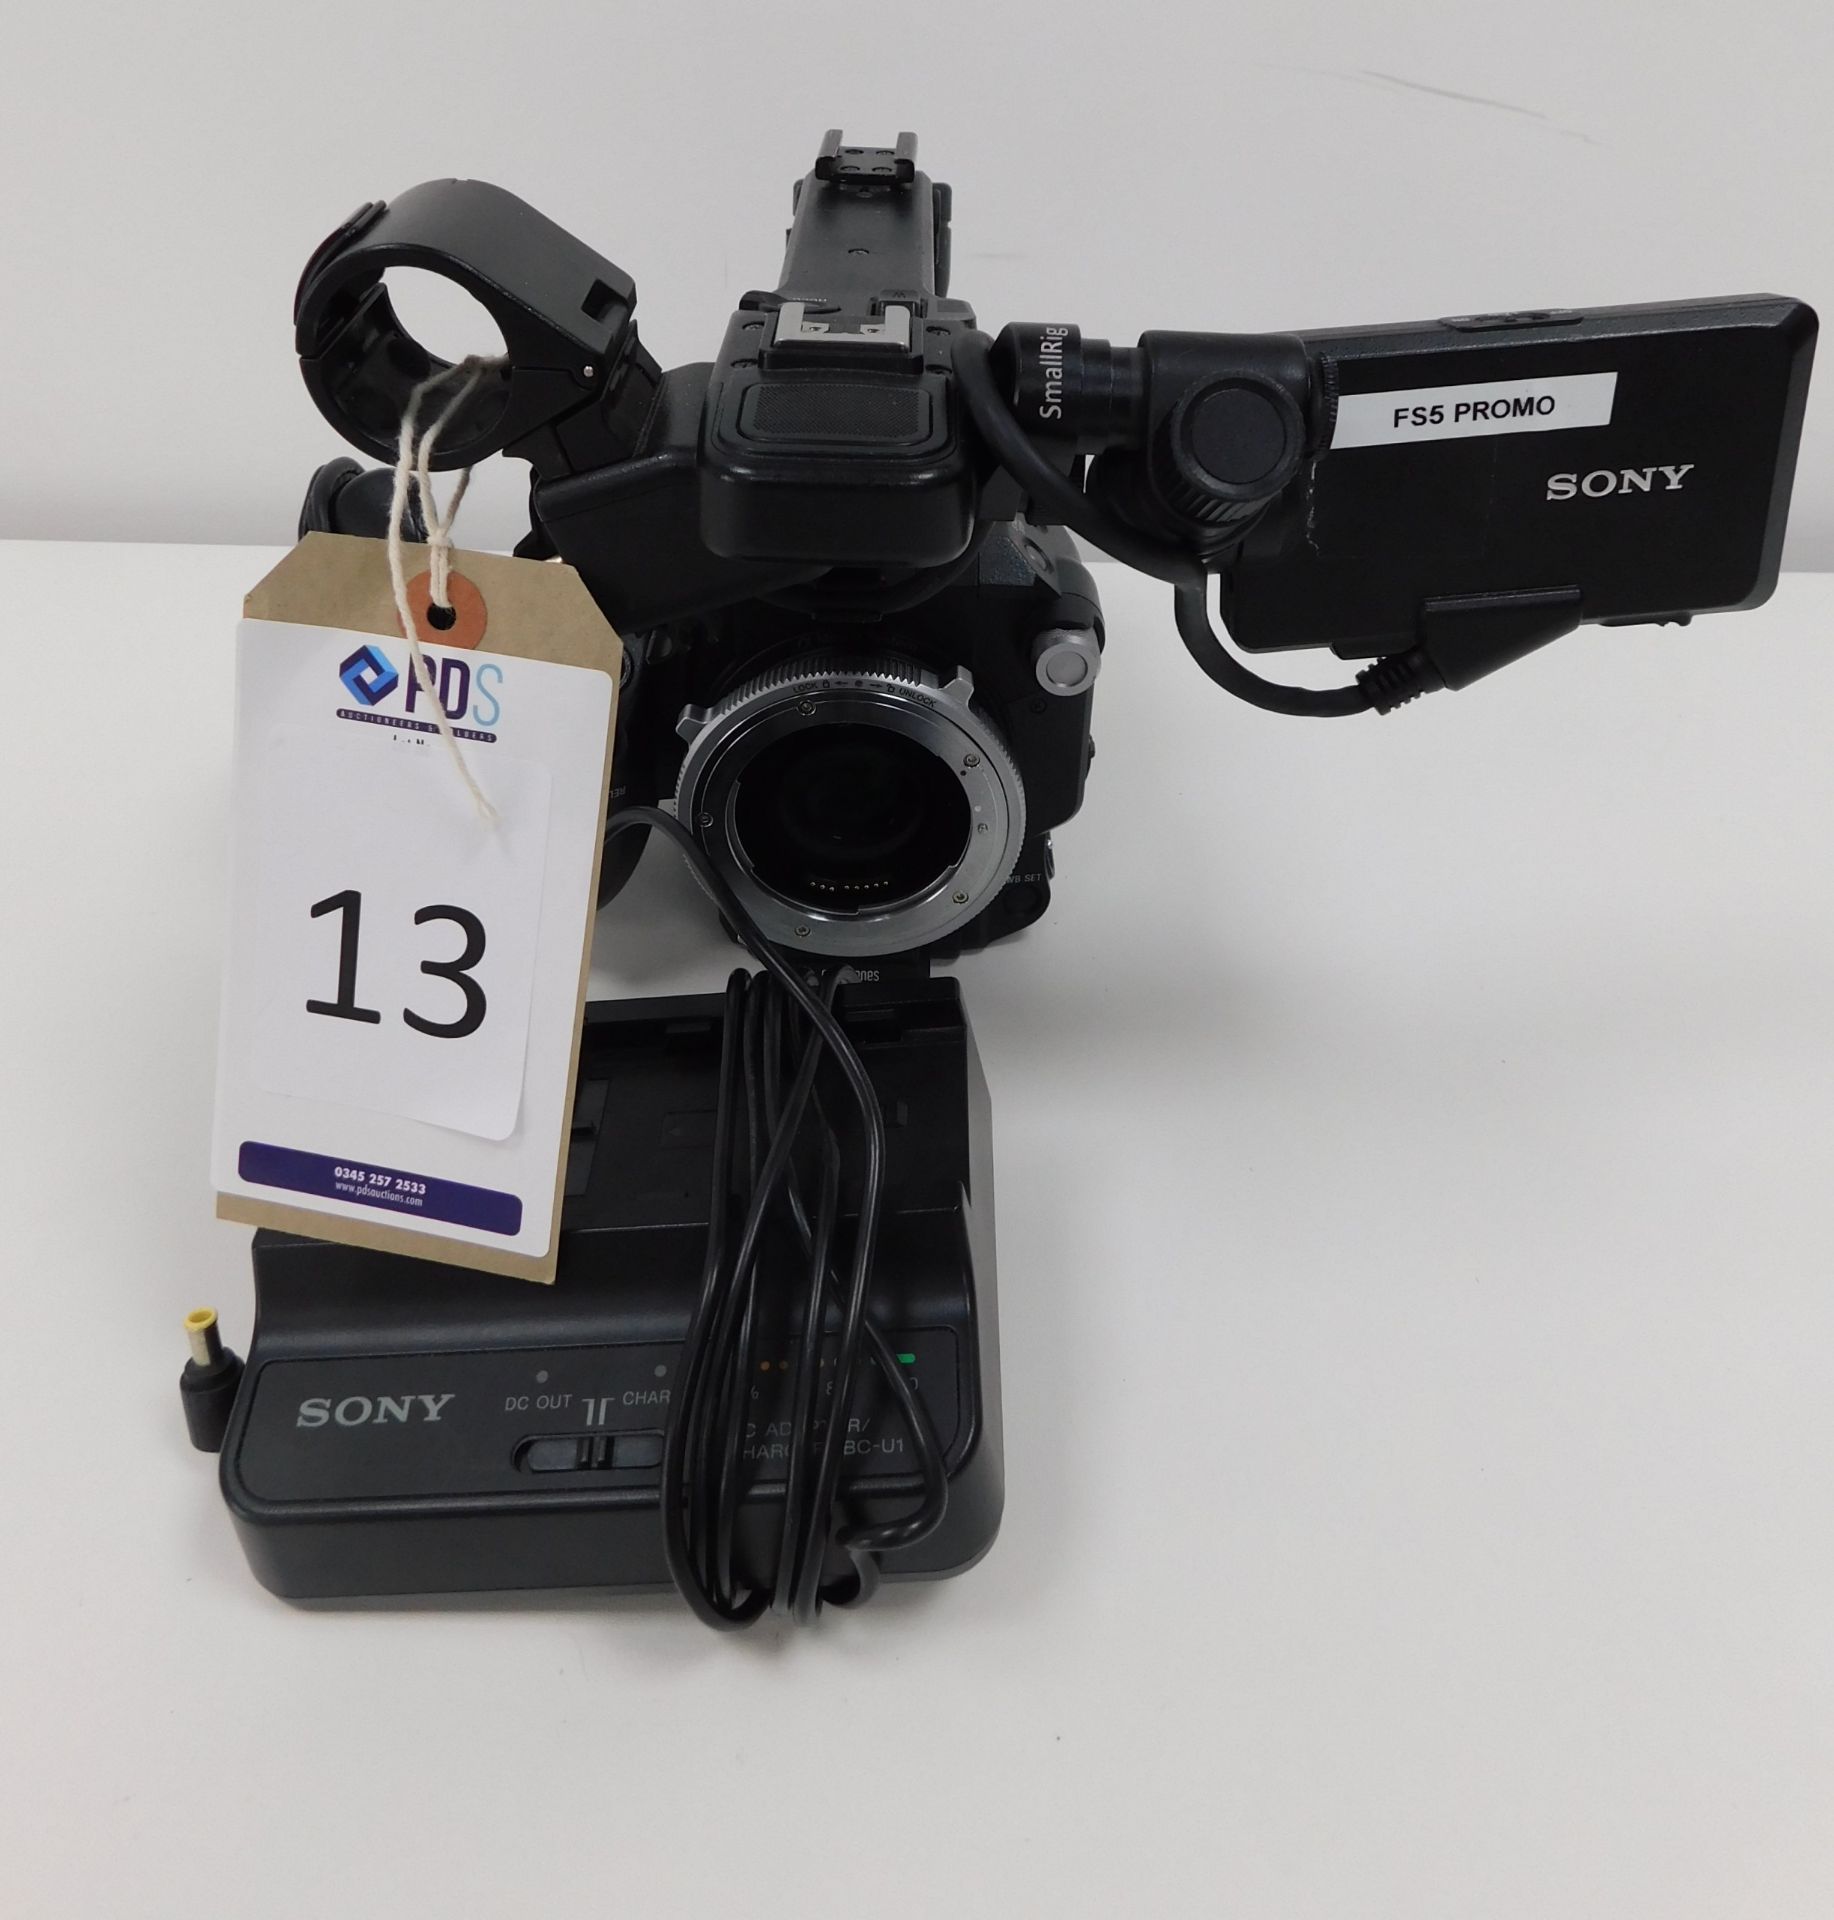 Sony PXW-FS5 Solid State Memory Camcorder Body with Battery and Charger, Serial Number 1610134 (